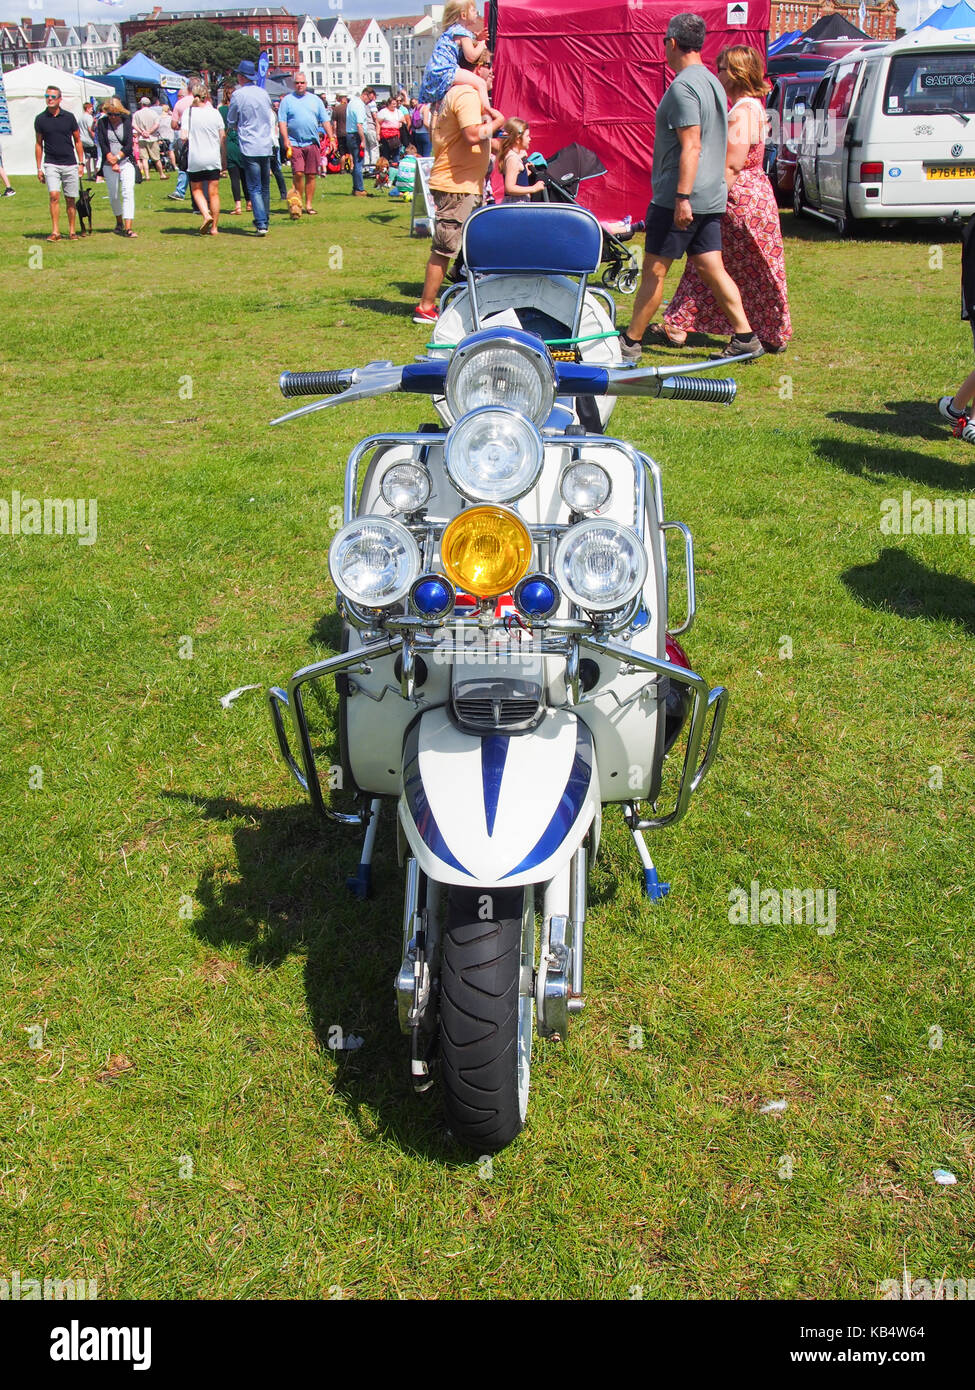 A retro scooter at a summer scooter meet Stock Photo